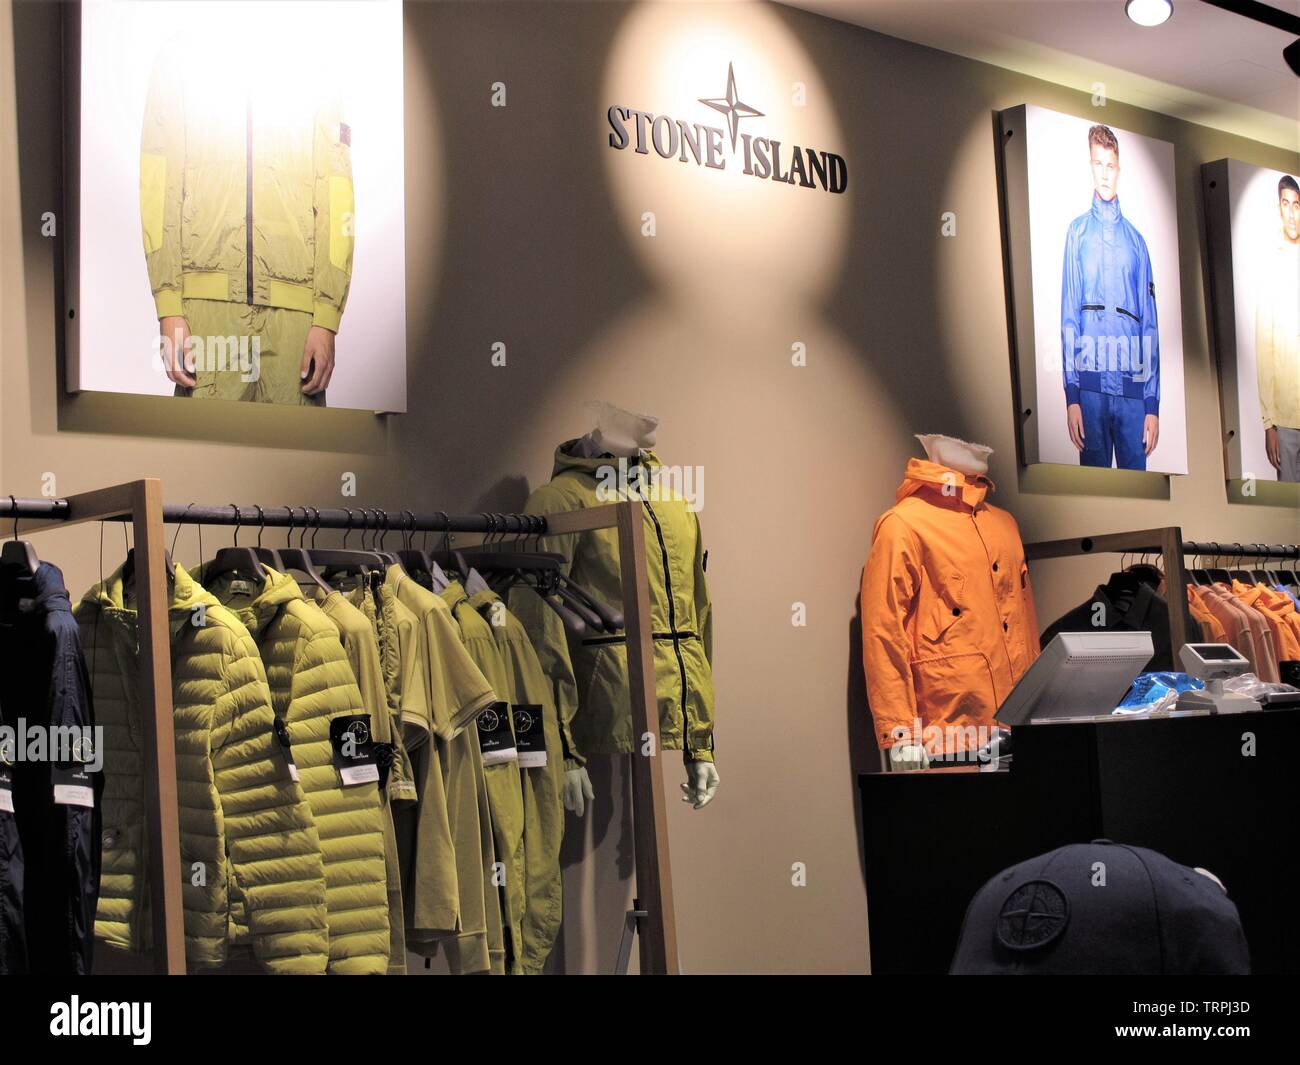 Stone island clothing hi-res stock photography and images - Alamy